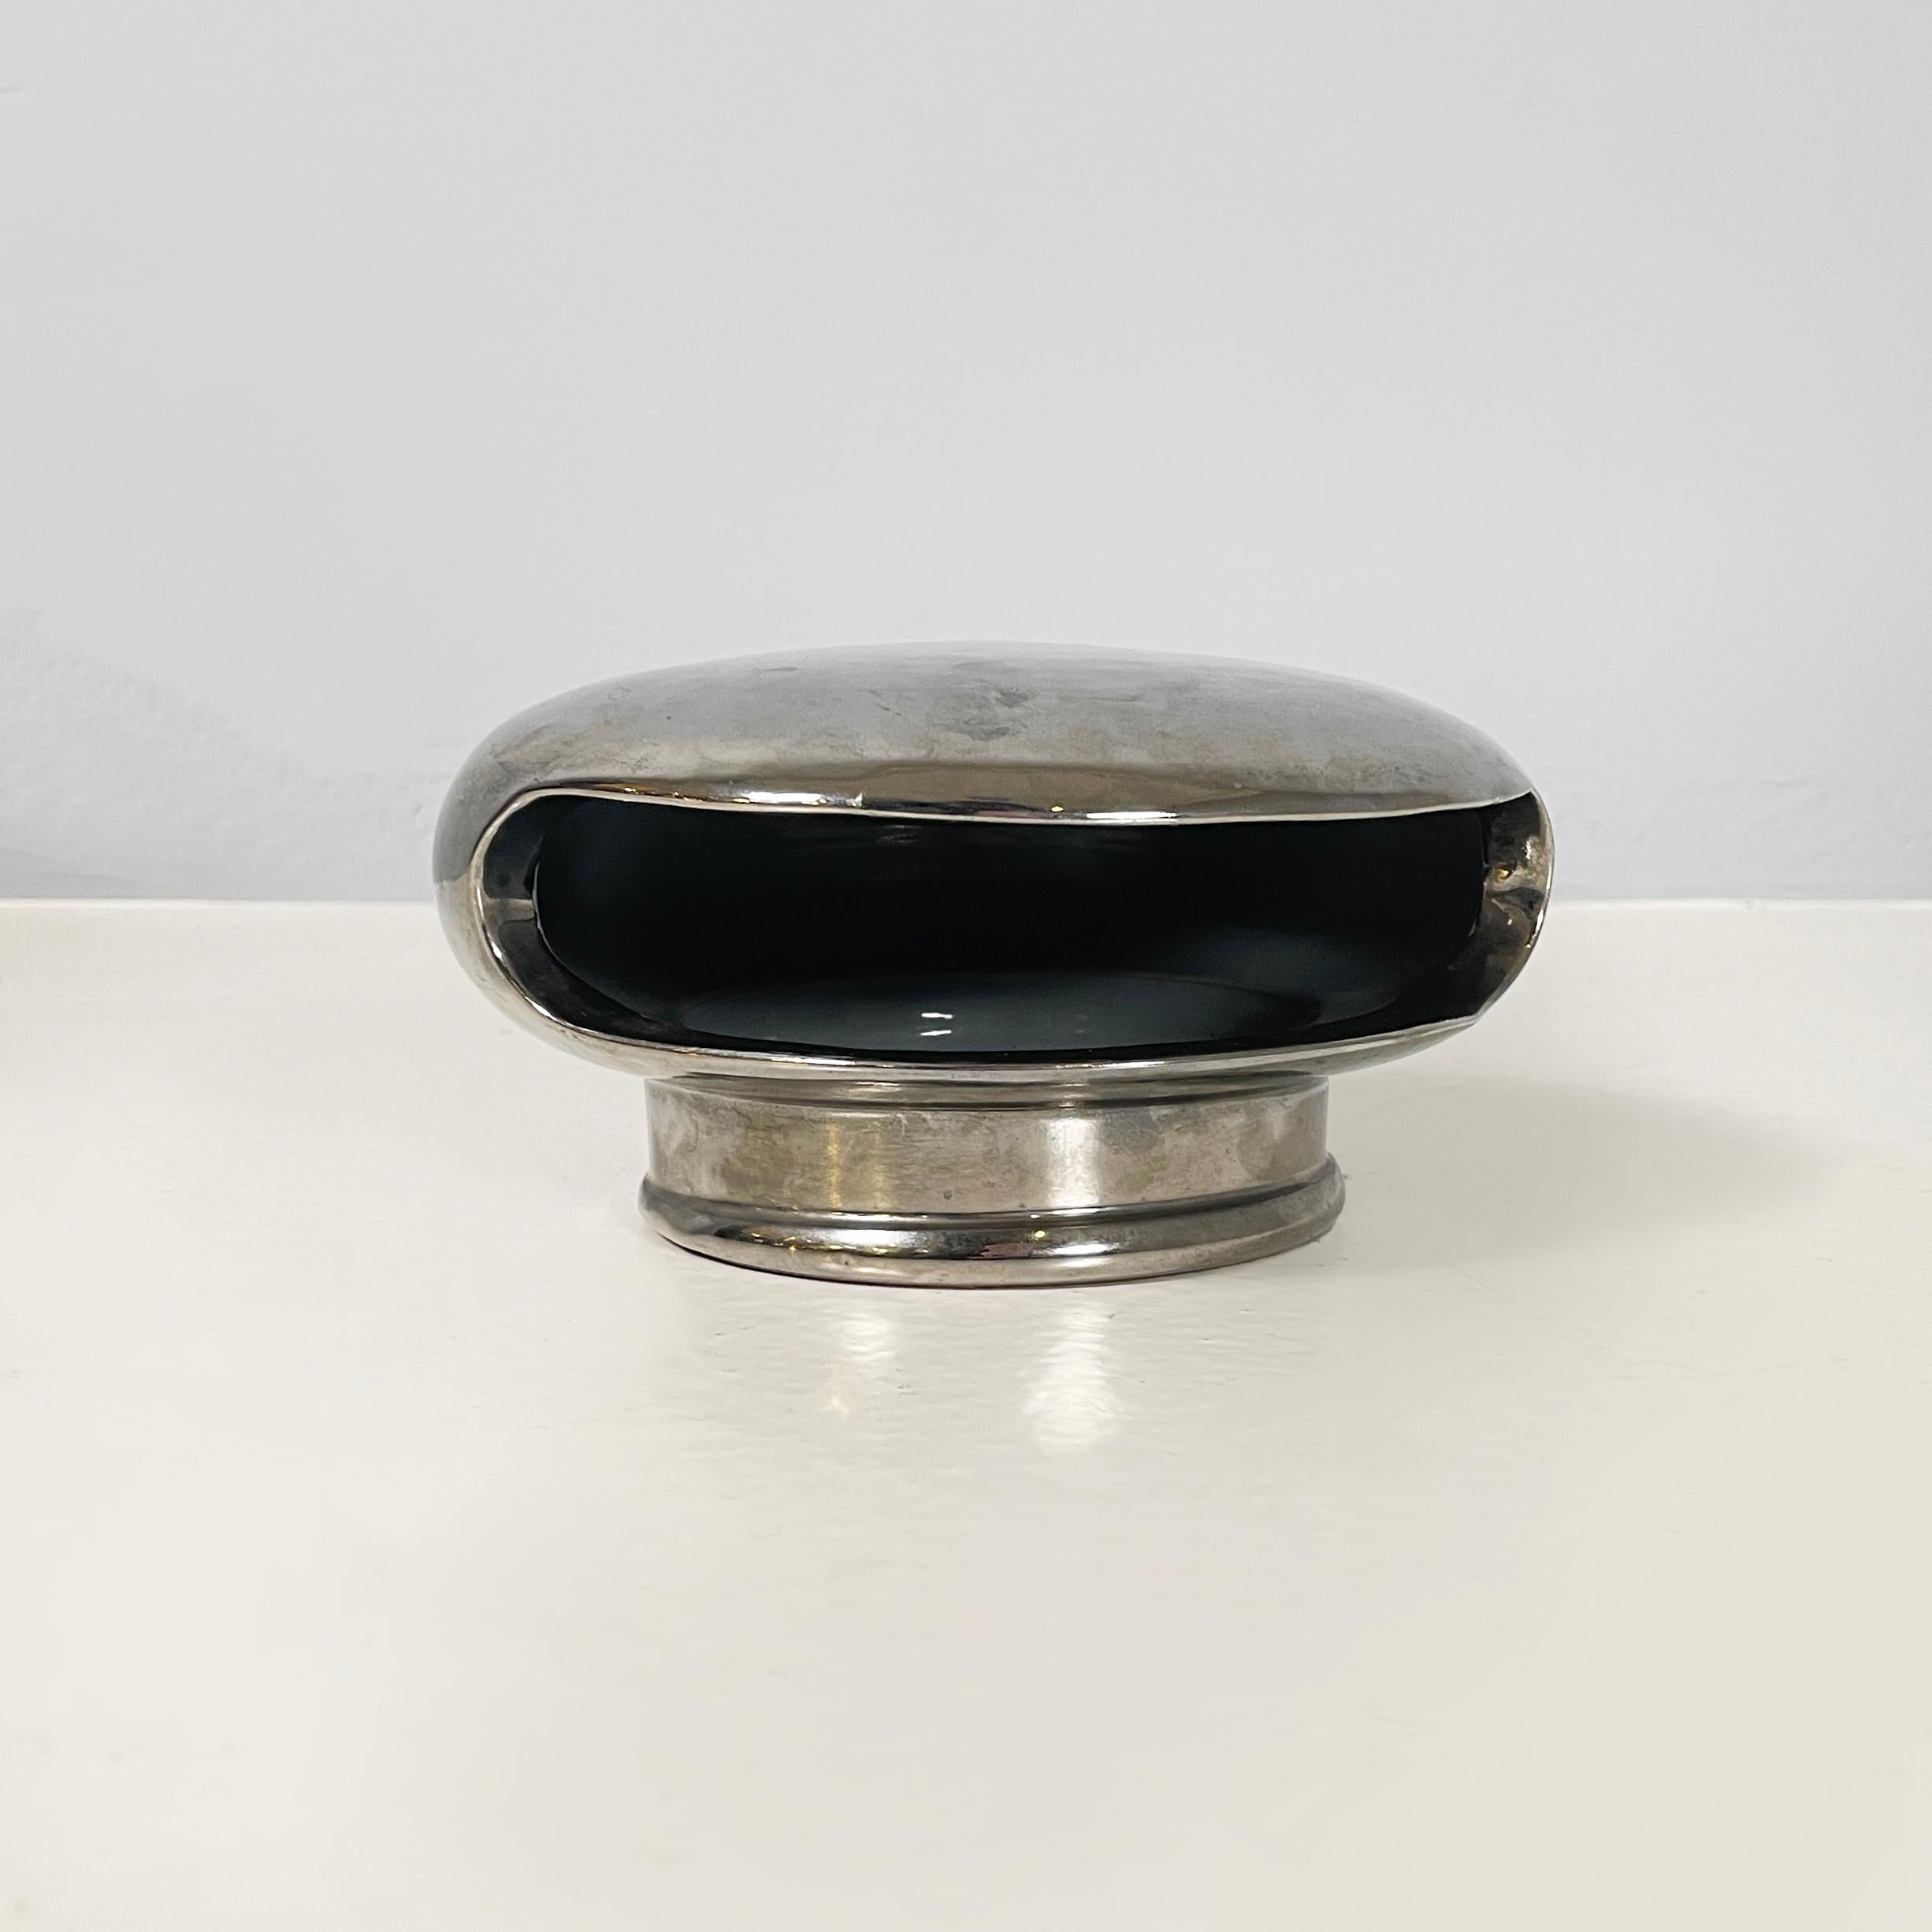 Italian modern Decorative table object or sculpture in silver ceramic, 2000s
Decorative table object with a round base, entirely in silver glazed ceramic. The rounded structure has a compartment that can be used to store small objects. The round